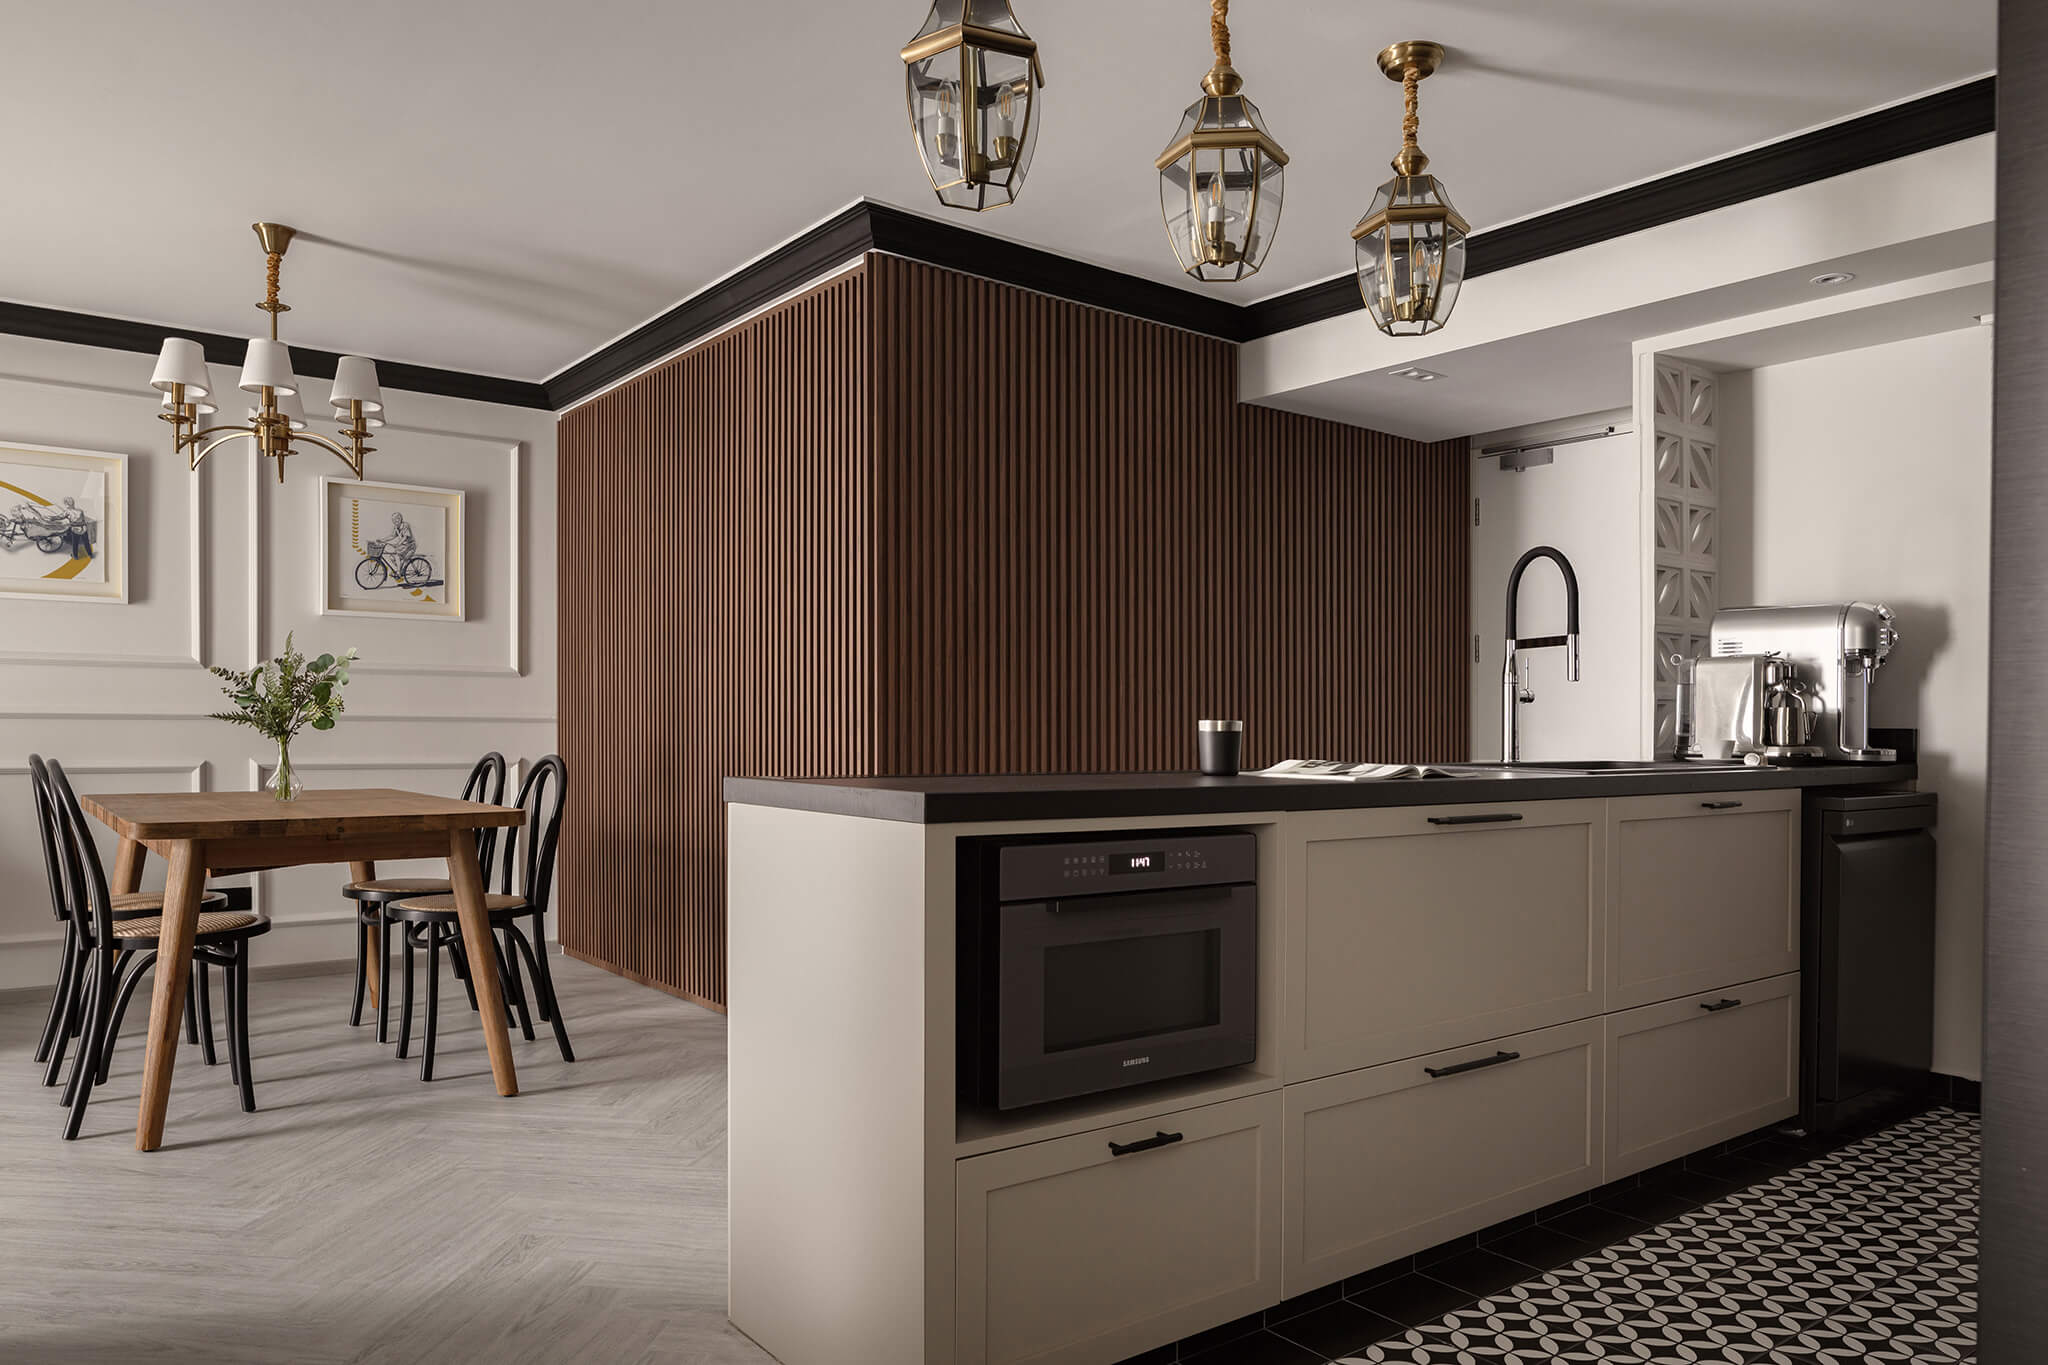 Chic transitional kitchen design with taupe cabinetry, herringbone wood floor, and brass pendant lighting over a classic dining set, featuring a sleek built-in microwave and espresso machine.